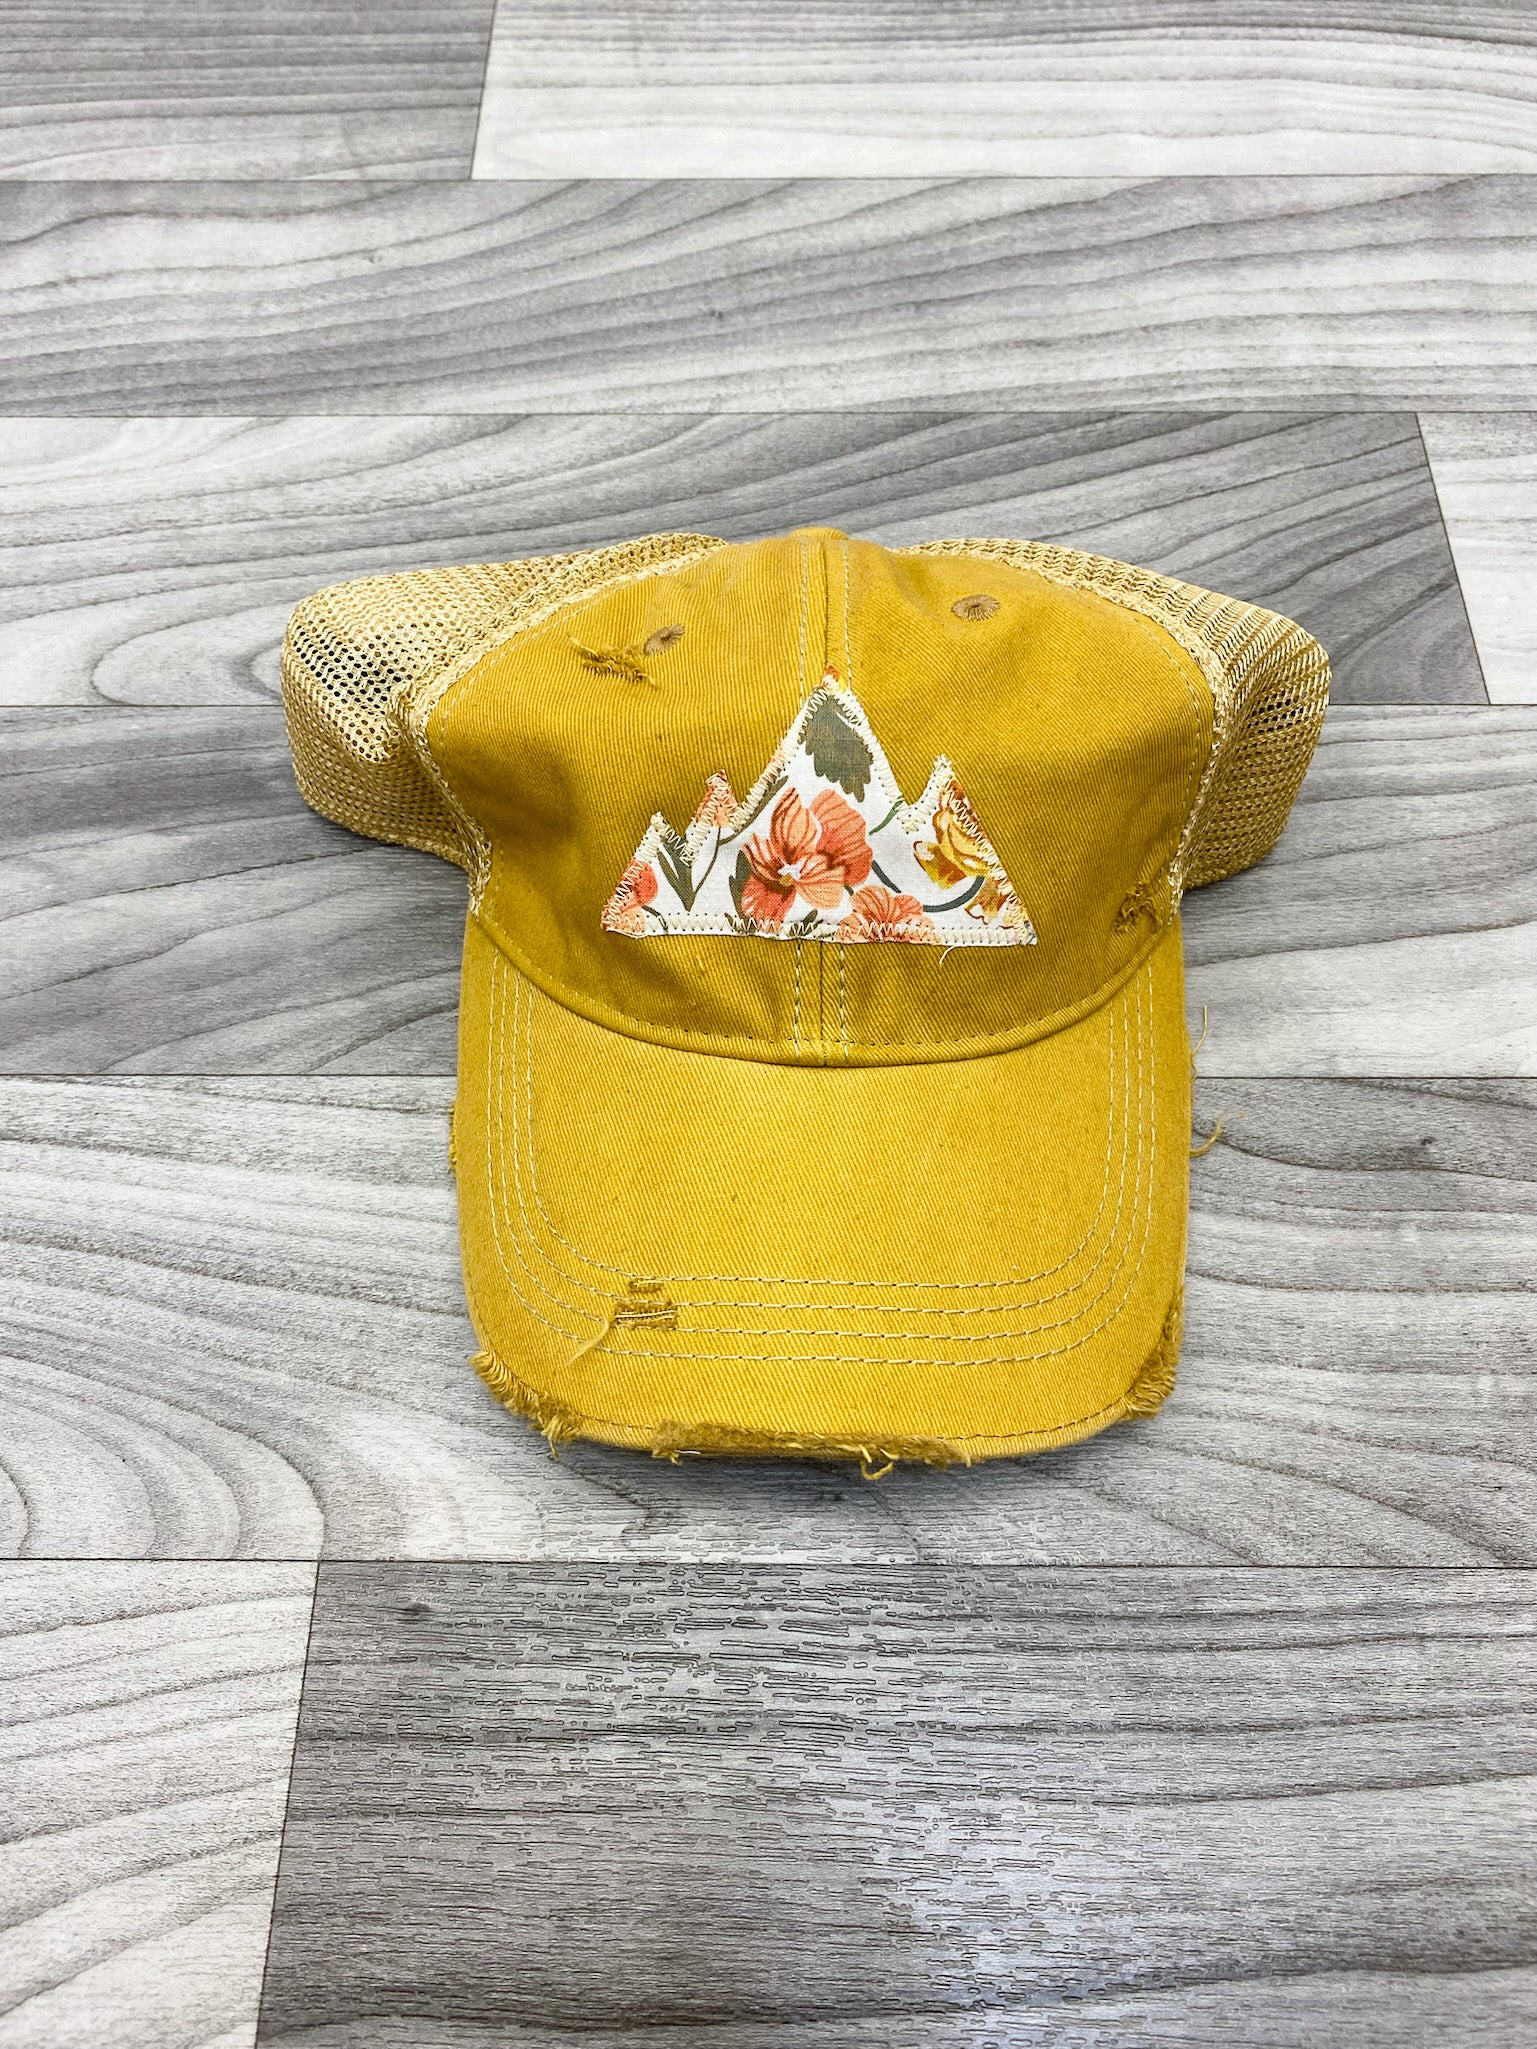 Mountain Floral Patch "Dirty Look" Trucker Hat-Mustard